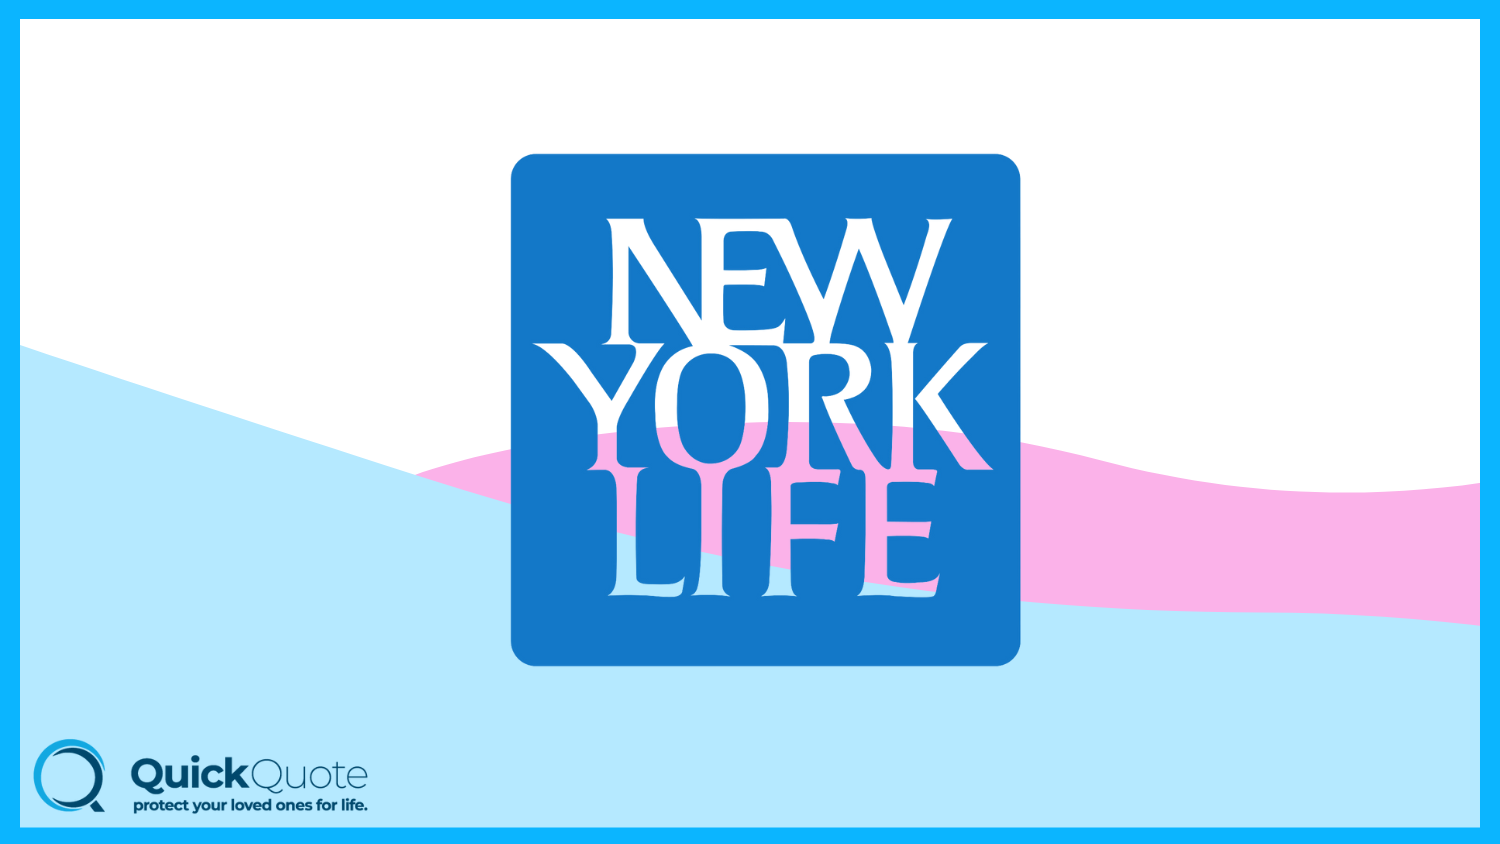 Best Life Insurance for Low-Income Families: New York Life